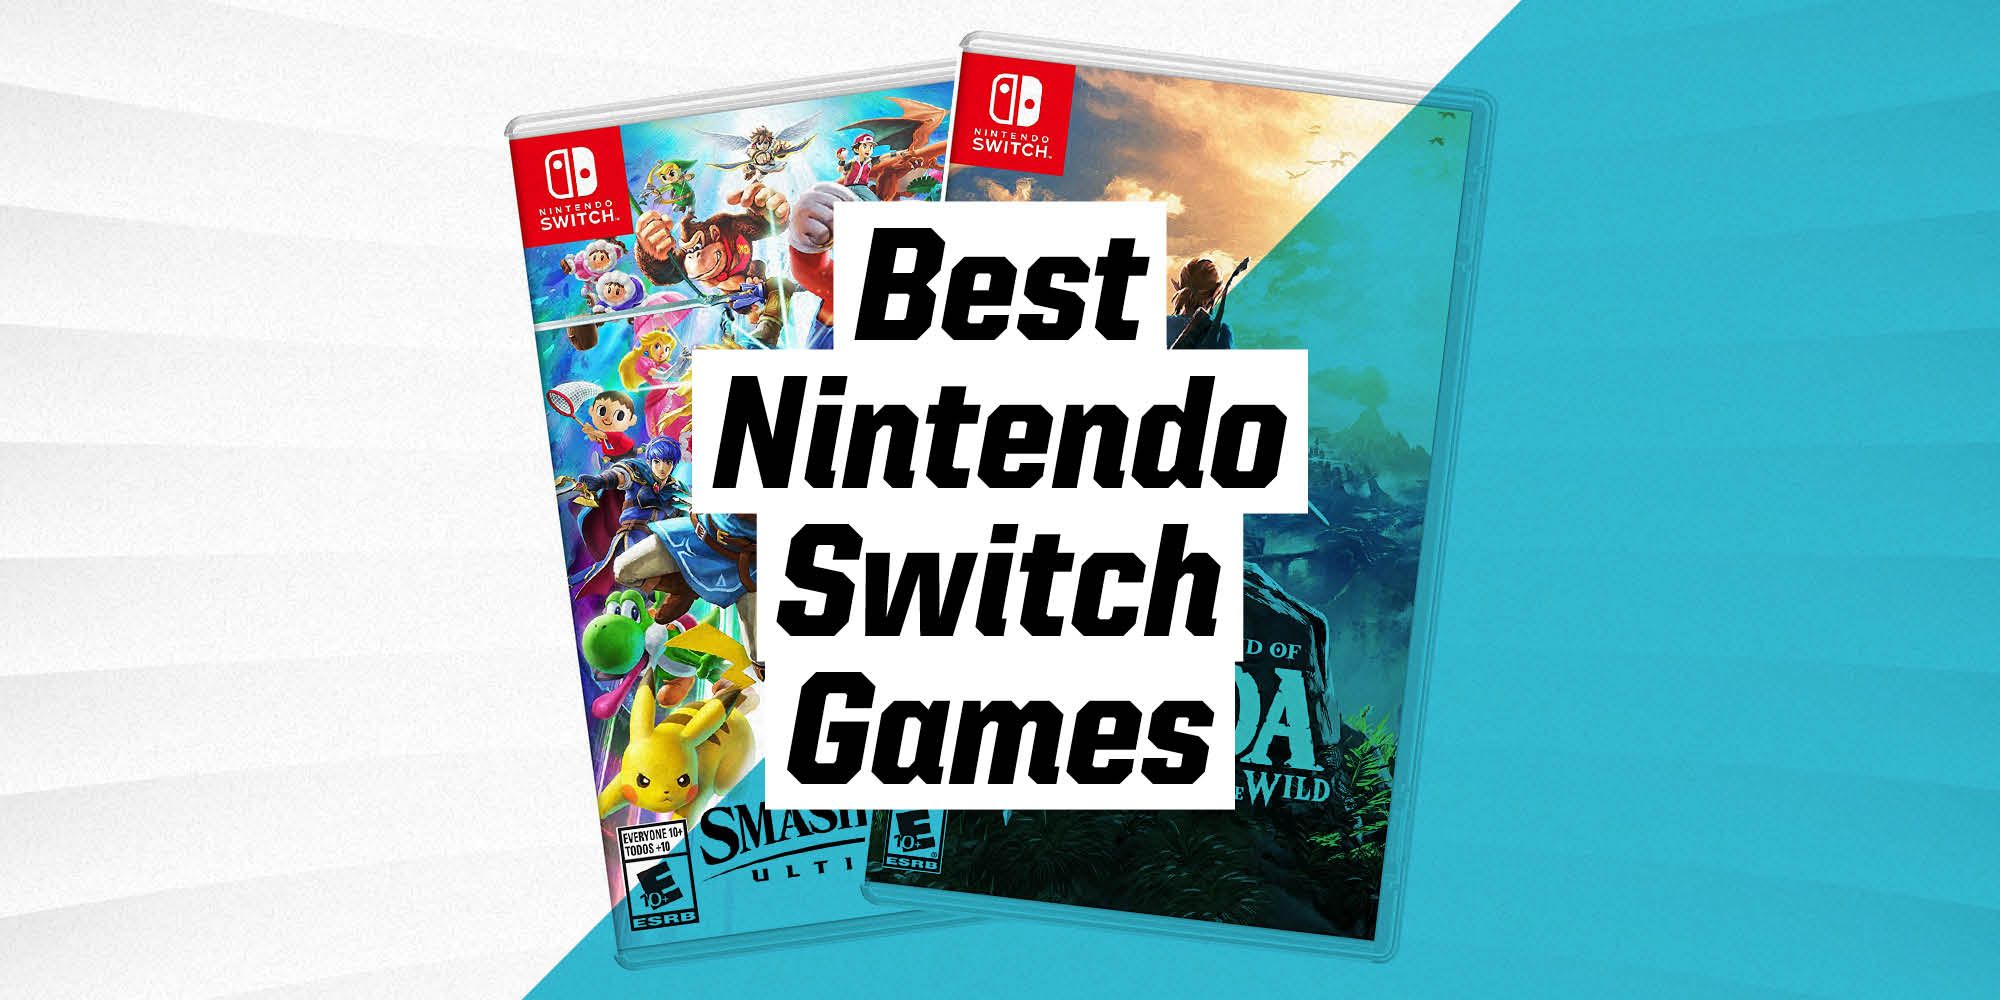 10 Nintendo Switch Games You Should Play Right Now